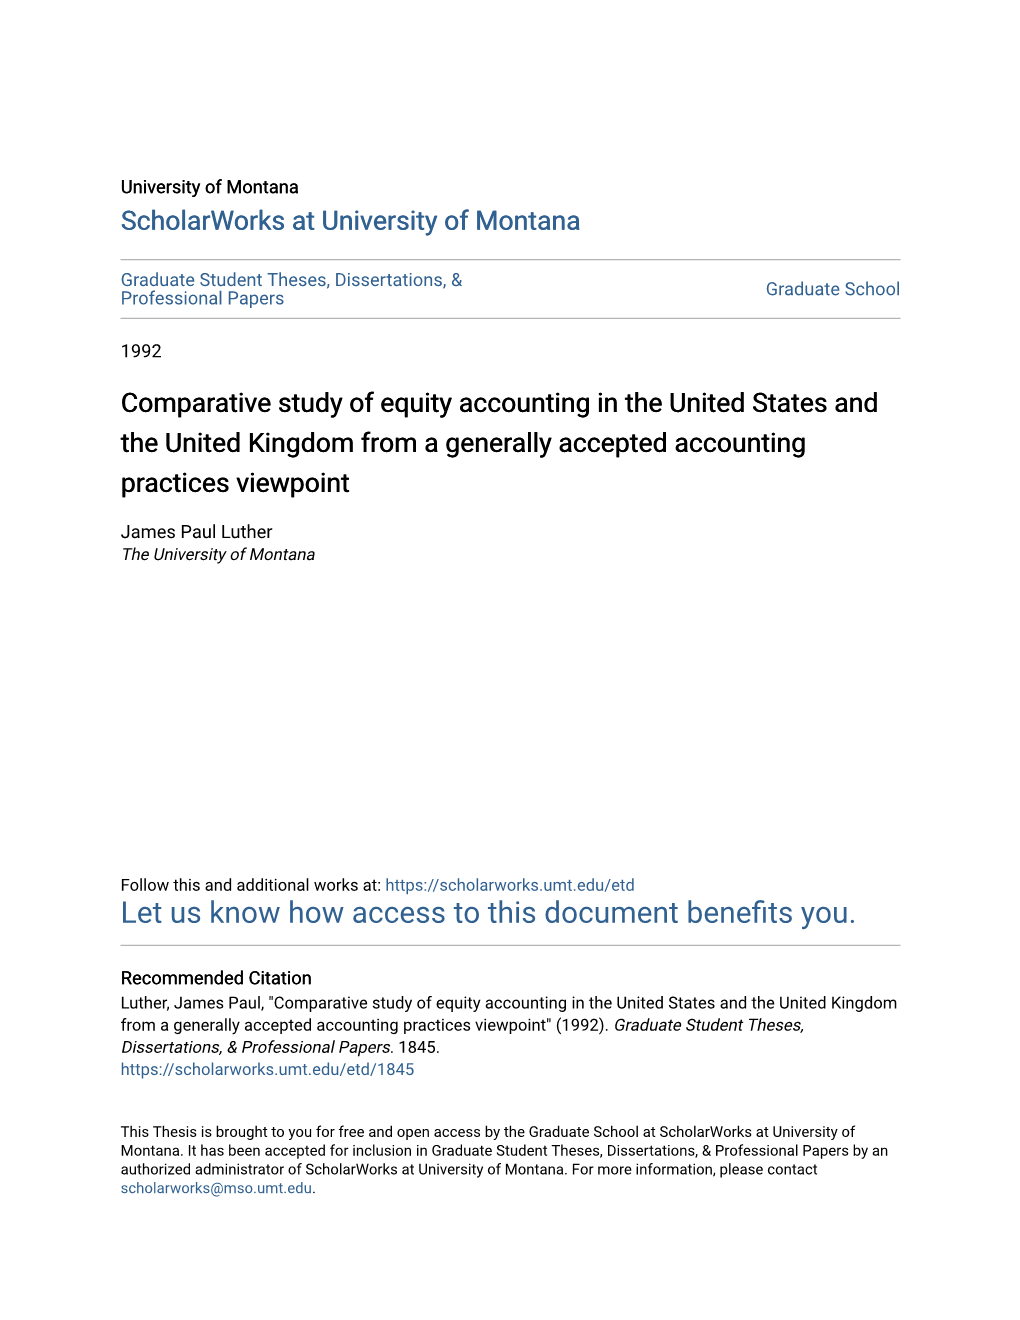 Comparative Study of Equity Accounting in the United States and the United Kingdom from a Generally Accepted Accounting Practices Viewpoint